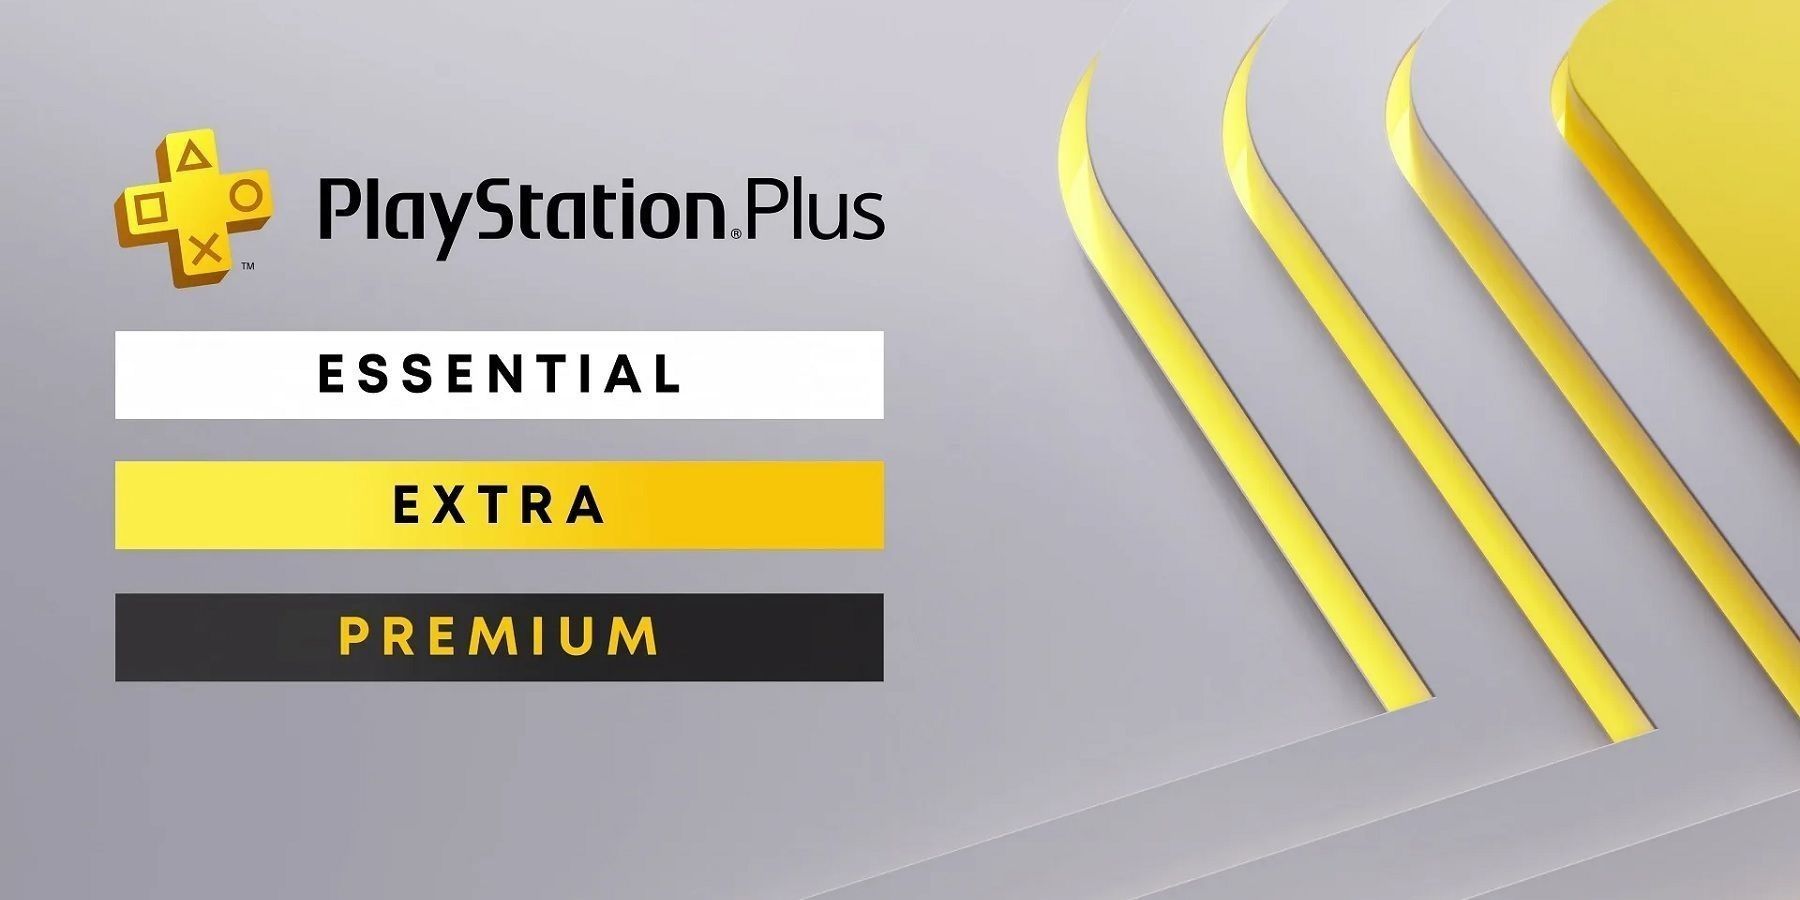 billbil-kun on X: Save up to 30% for players who join PS Plus for Black  Friday 2023, but how much for low tiers (Essential, Extra)? 👀 And current  subscribers could still extend